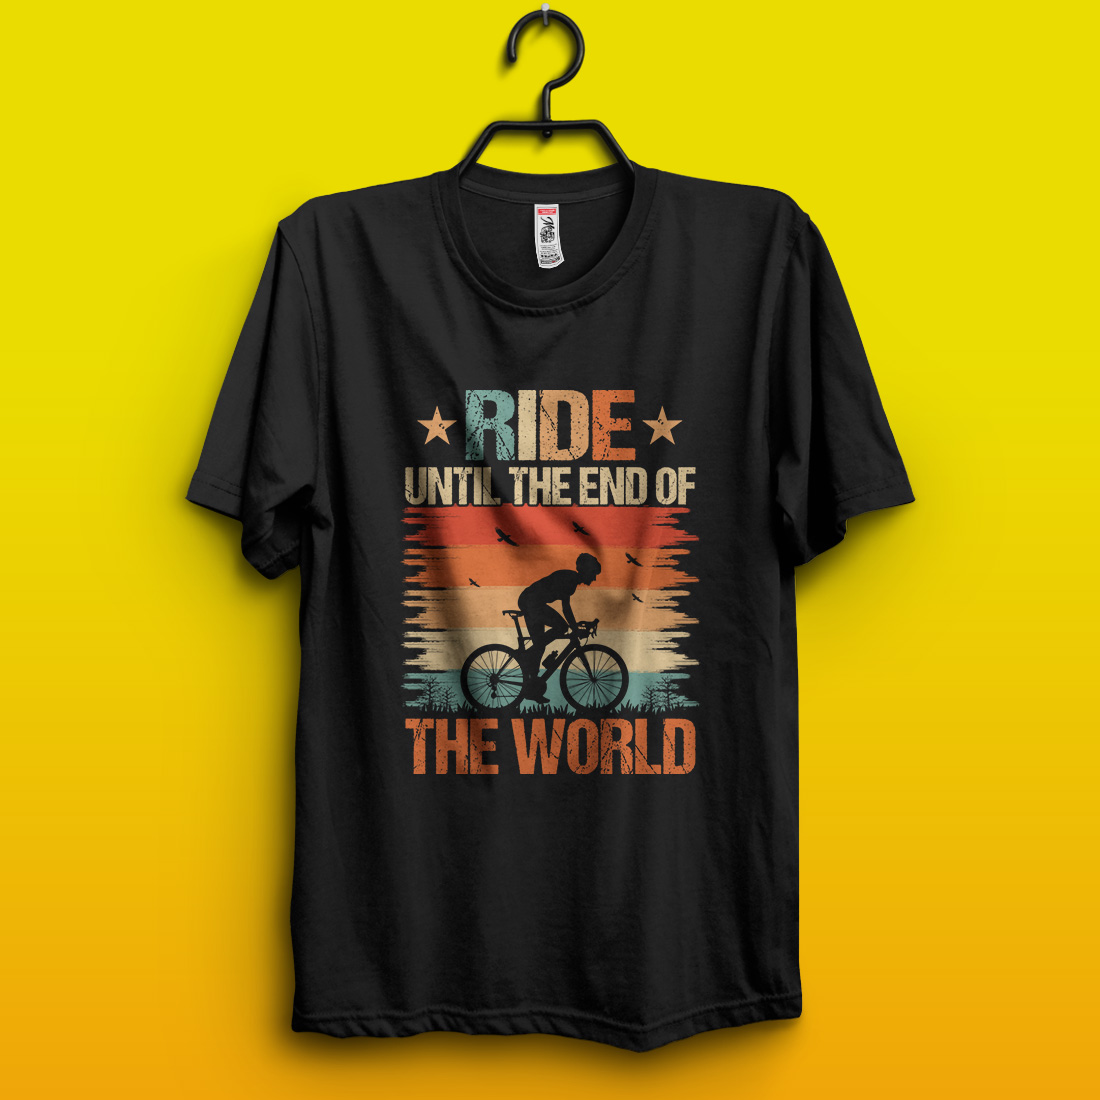 Ride until the end of the world – Cycling quotes t-shirt design for adventure lovers pinterest preview image.